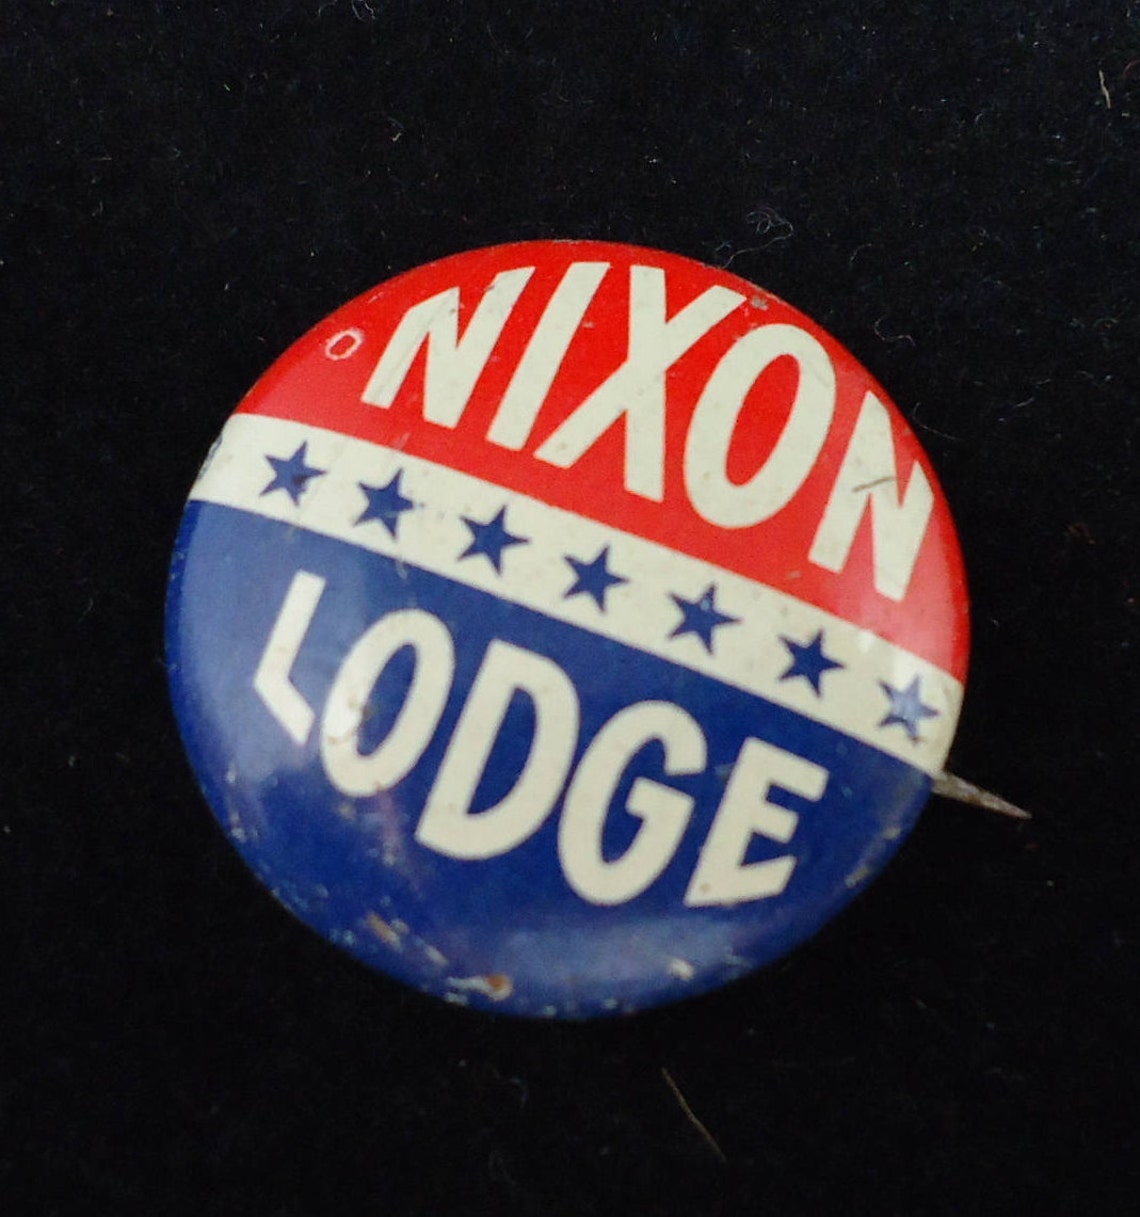 Vintage Nixon-lodge Campaign Buttons Collectibles Red White - Etsy